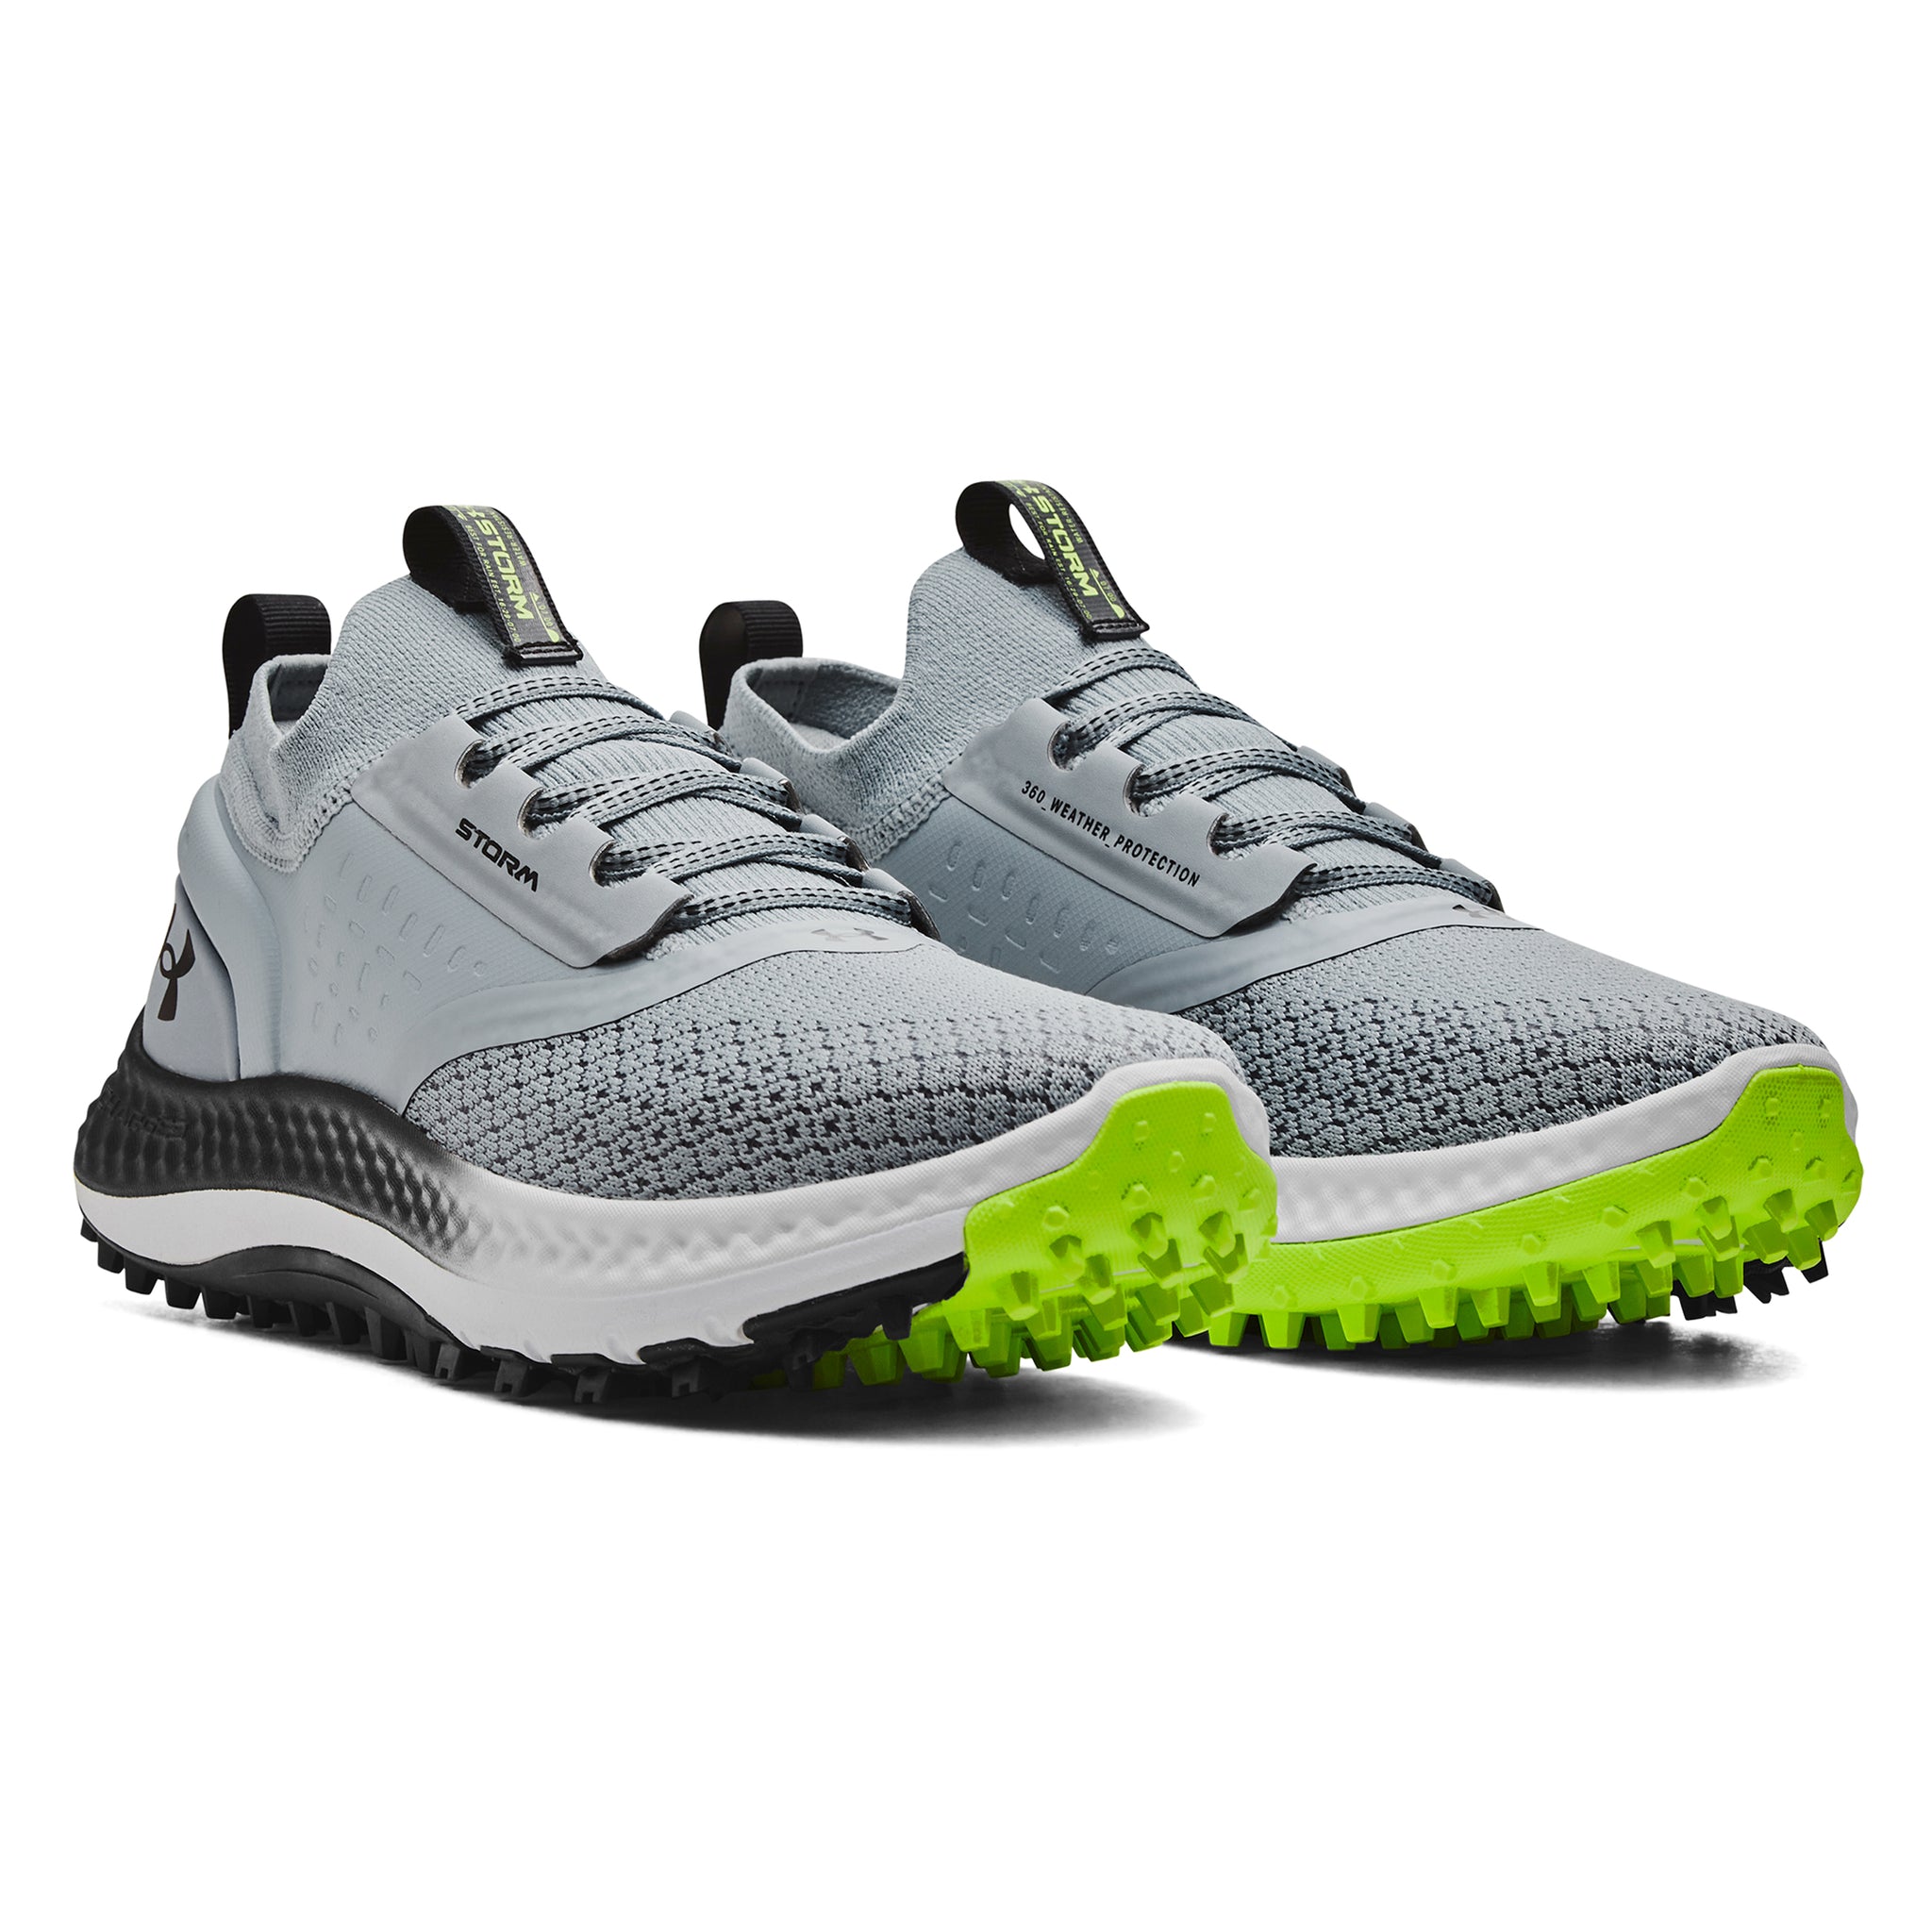 Under Armour Charged Phantom SL Golf Shoes